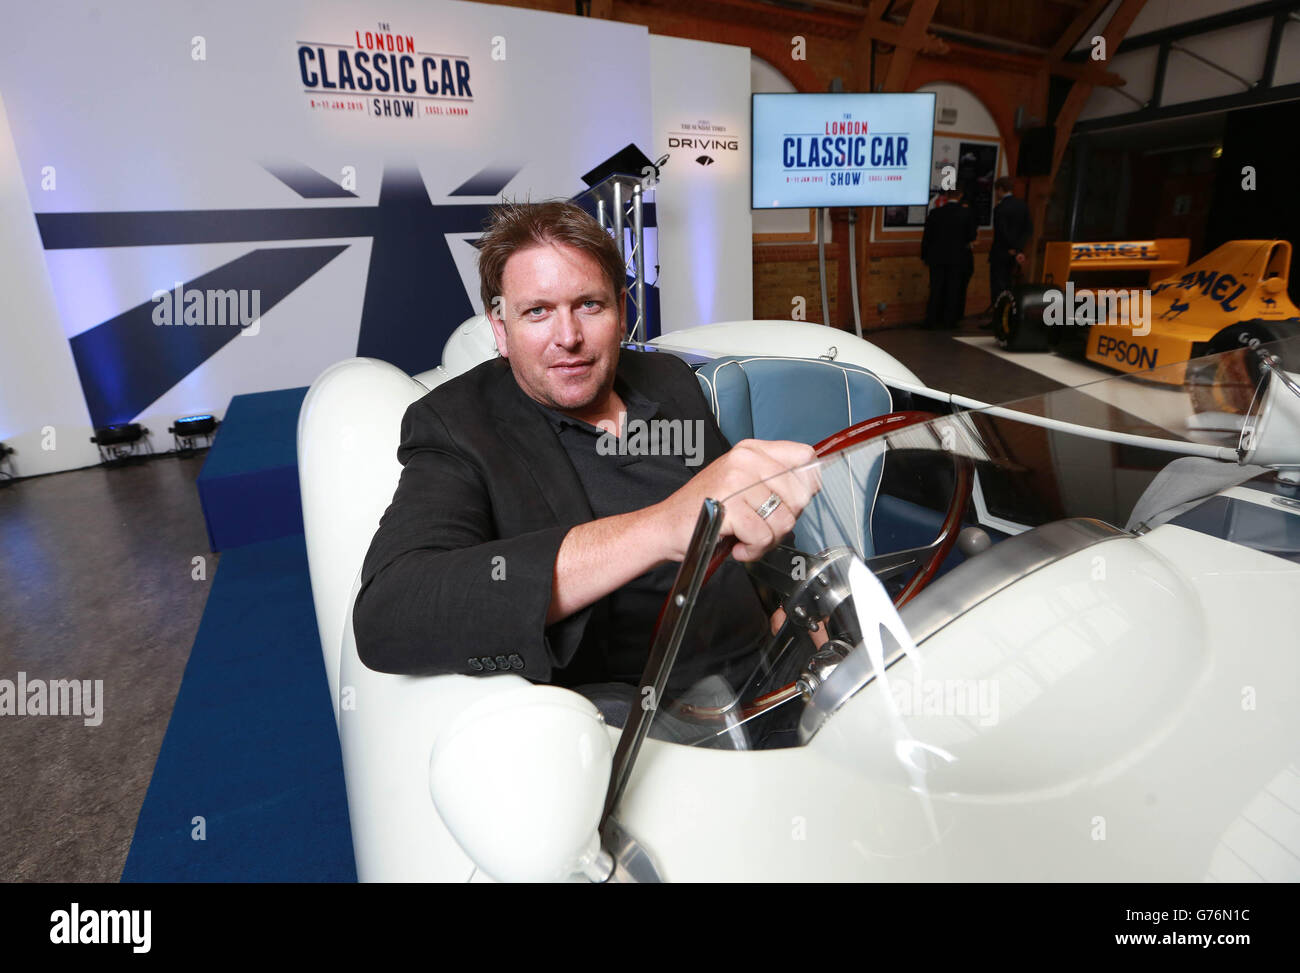 Television chef James Martin with a 1957 Ferrari TR250 during the launch of the inaugural London Classic Car Show, which will take place at ExCeL between 8th to 11th January 2015, in Kensington, London. Stock Photo